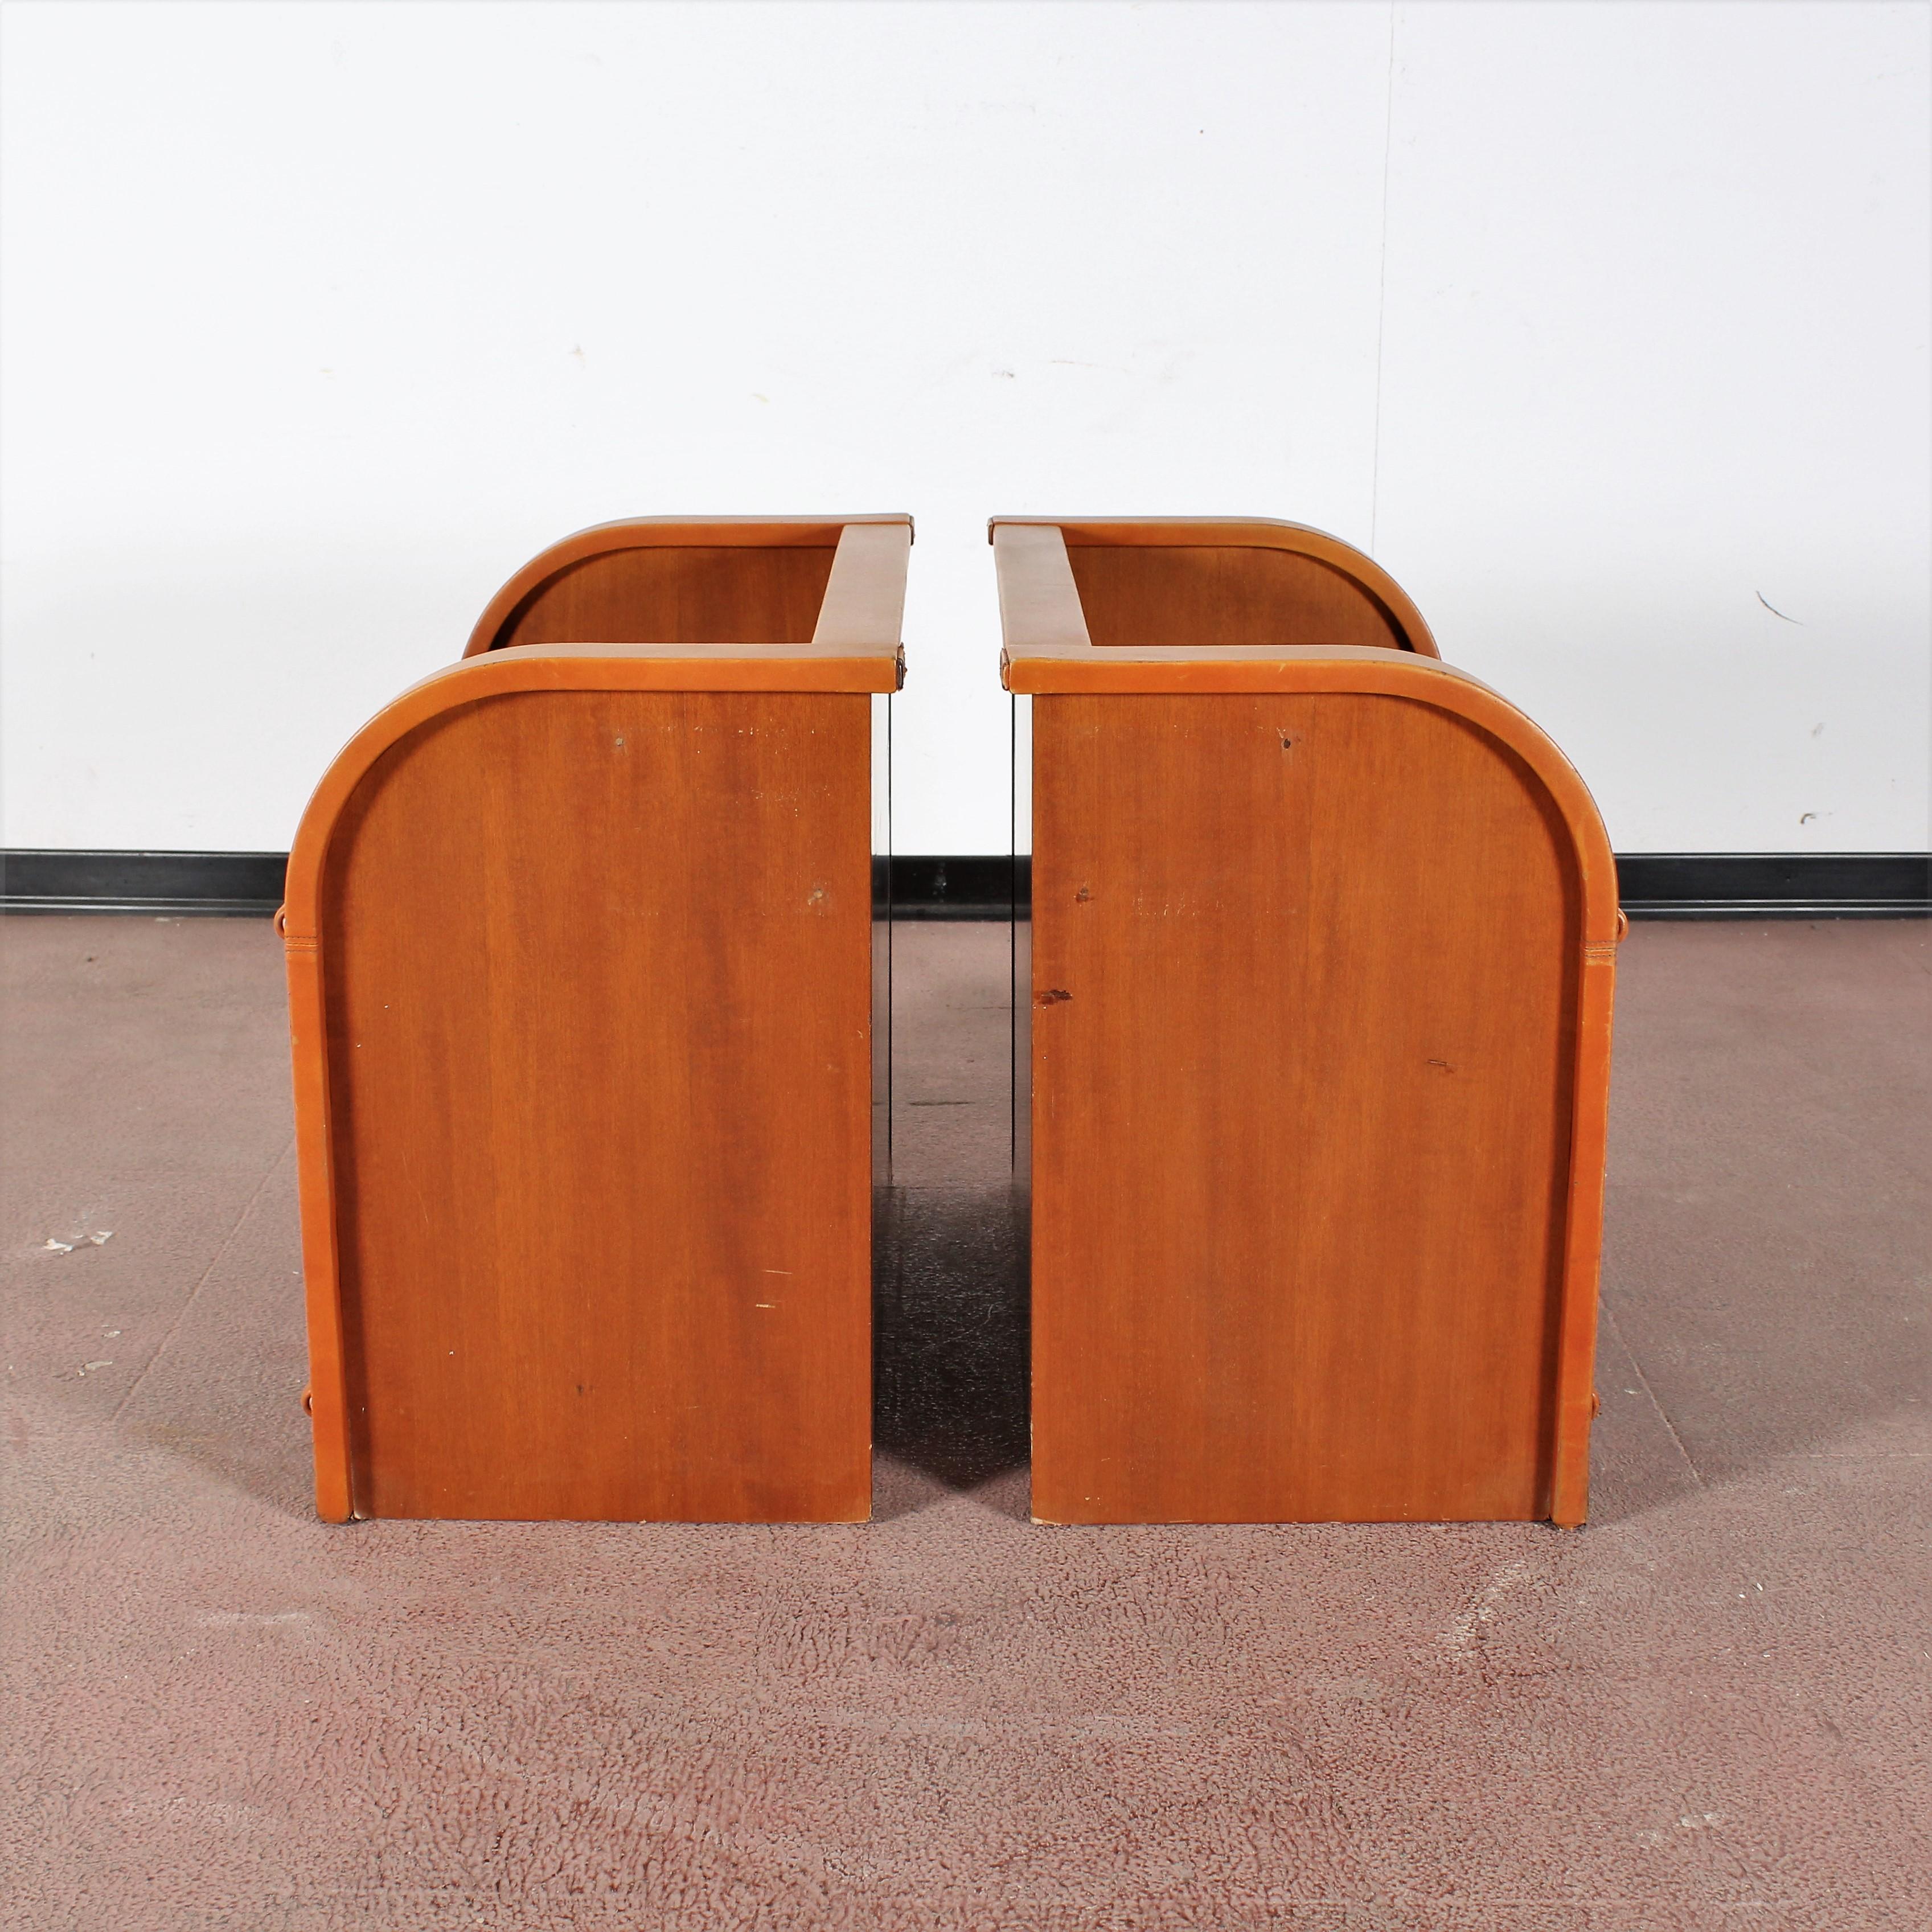 Midcentury Wood and Leather Poltrona Frau Nightstands, Set of 2, Italy, 1960s 3